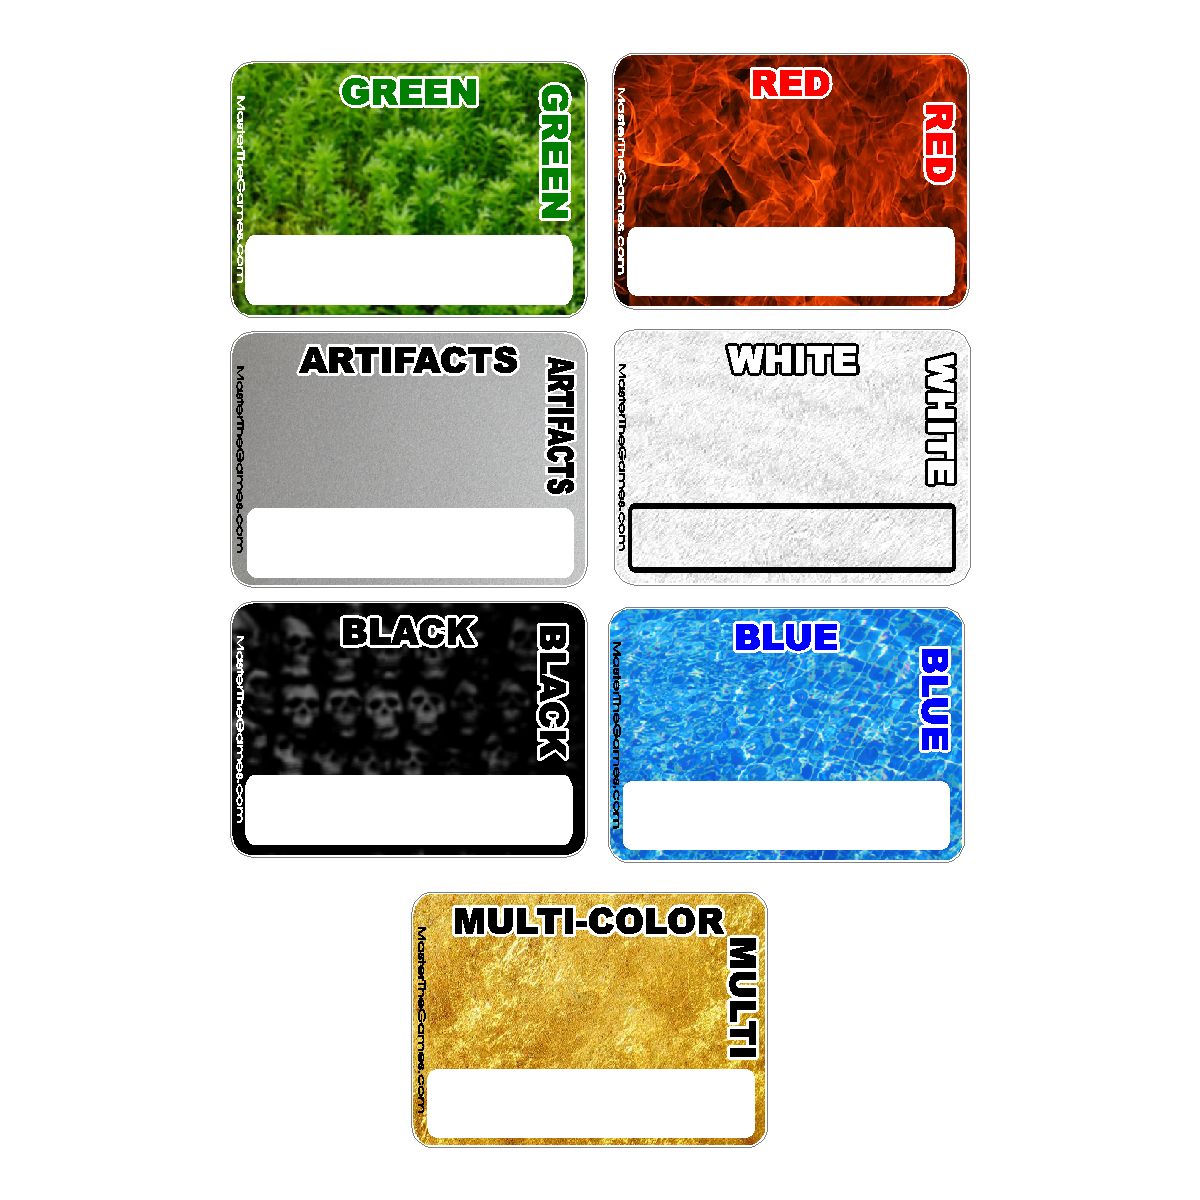 mtg-box-label-decals-basic-5-colors-plus-multi-color-and-colorless